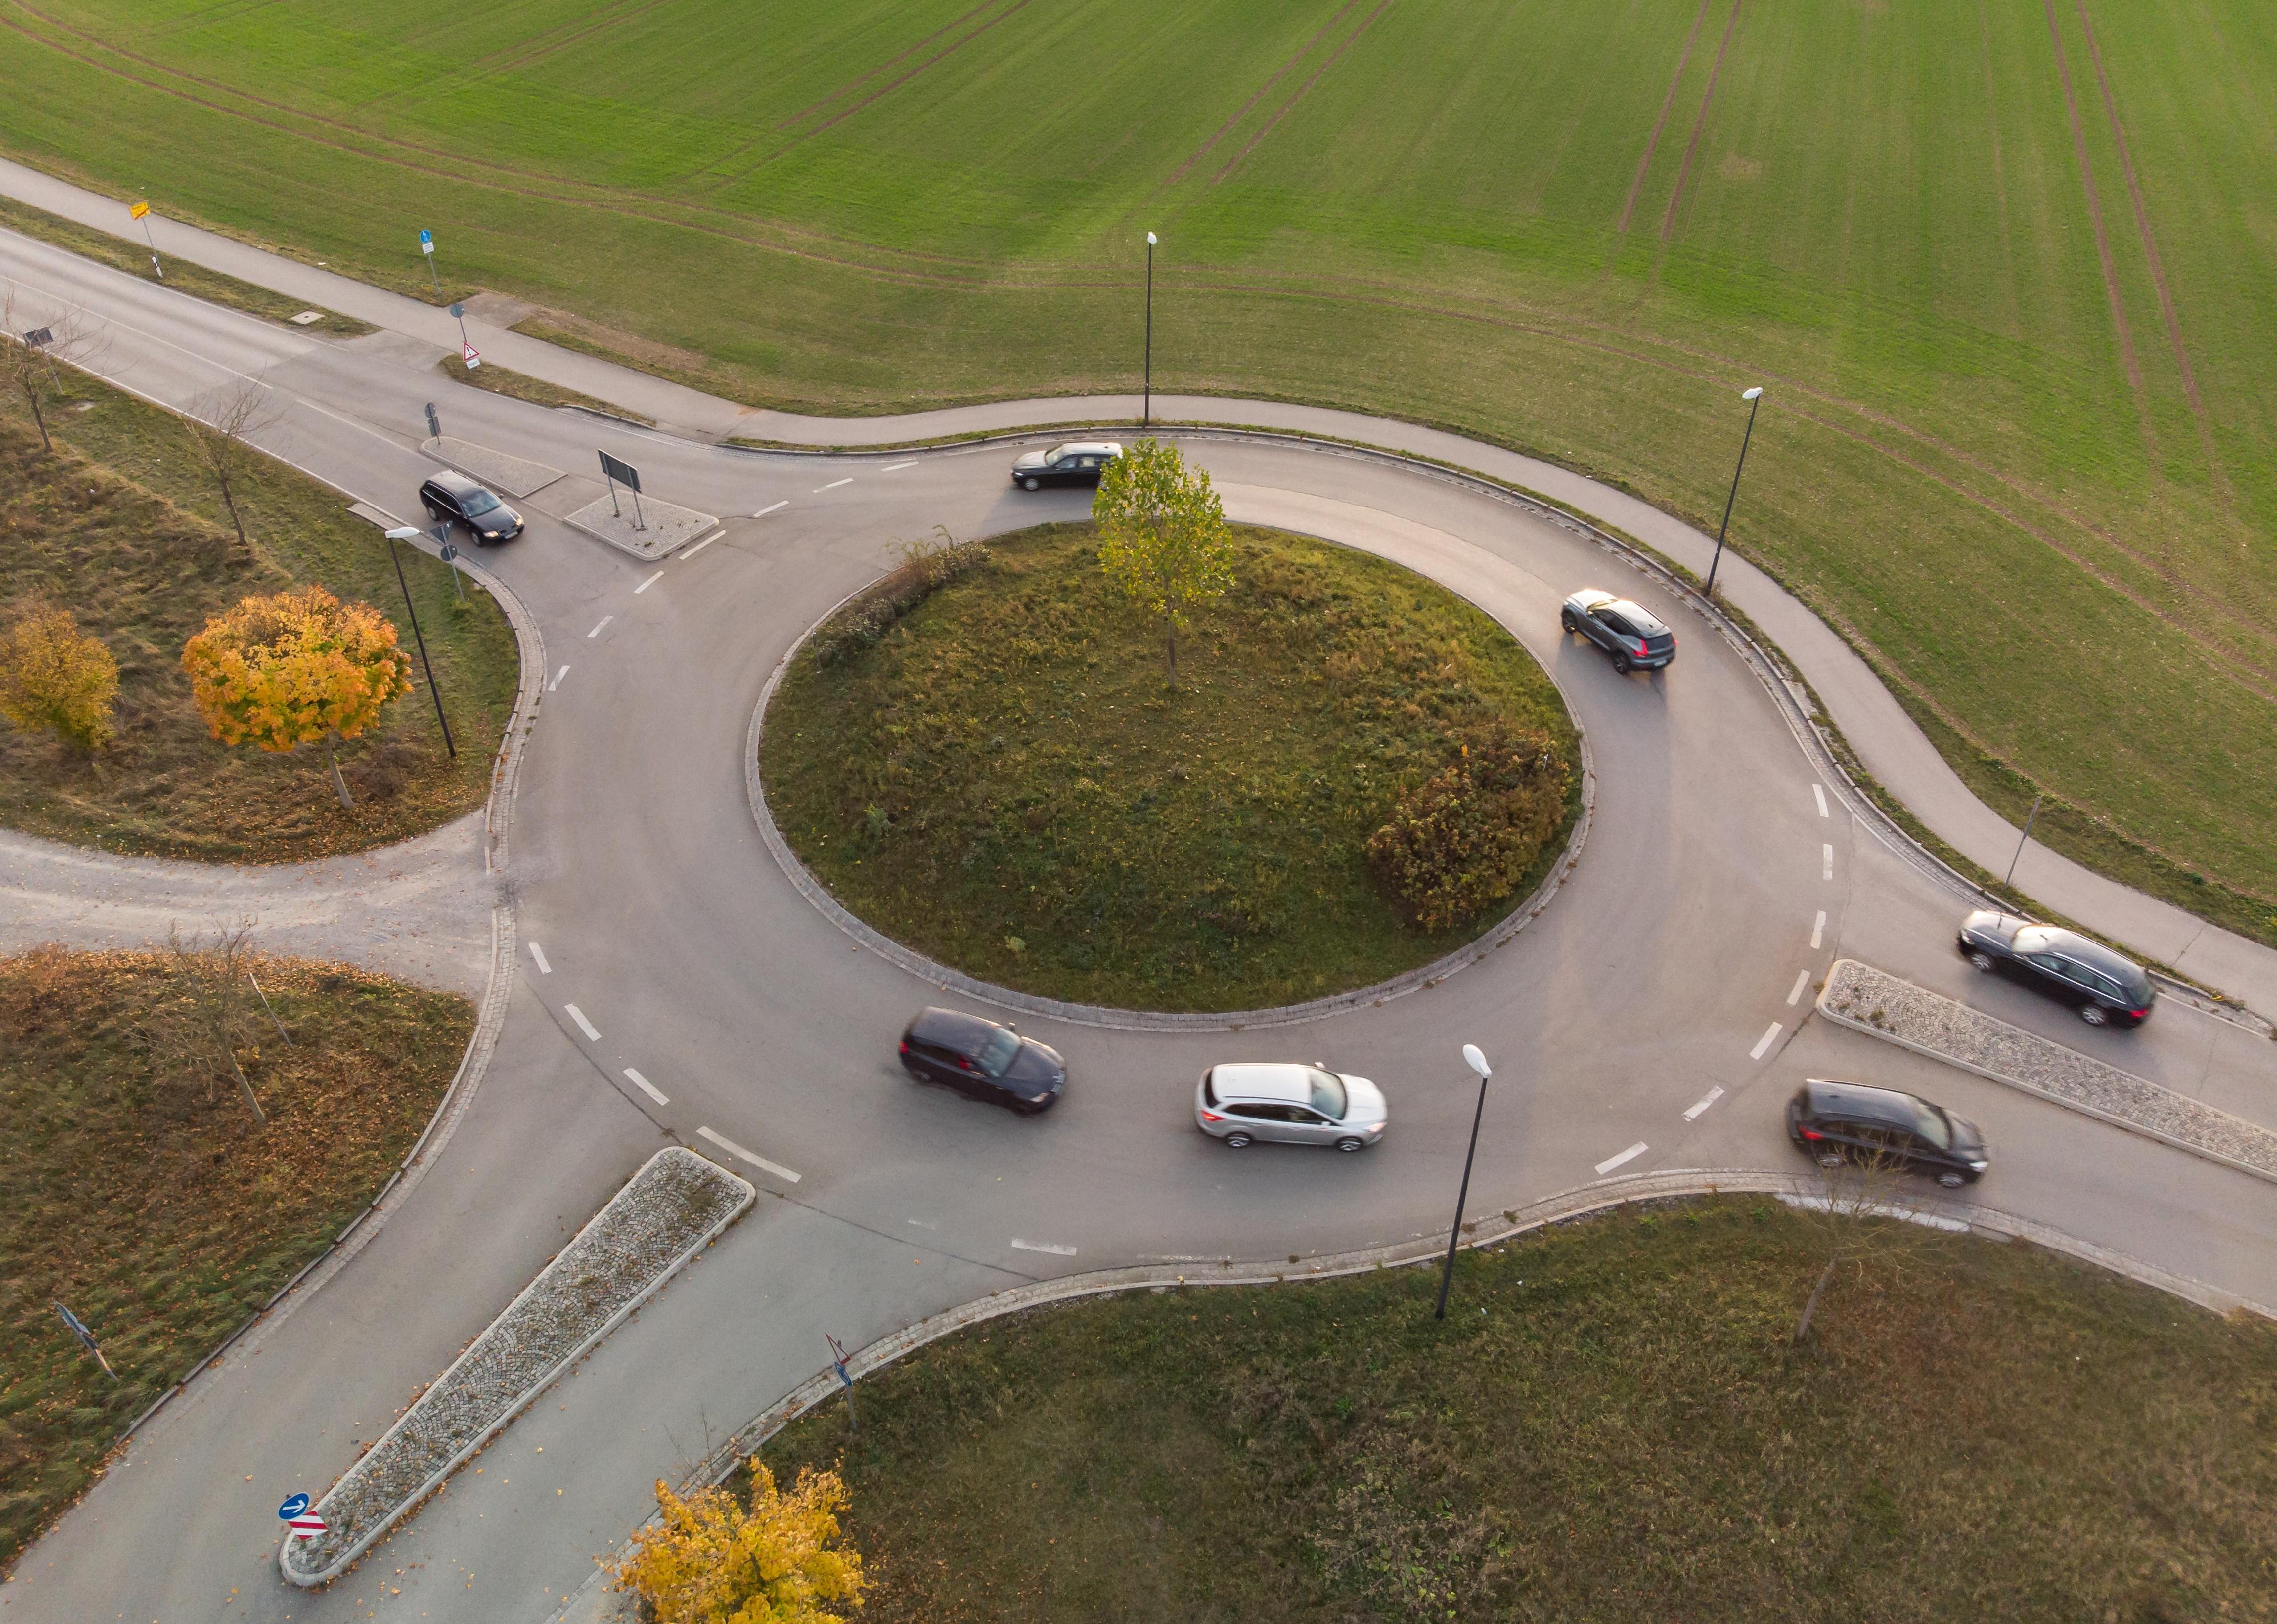 Aerial view of roundabout traffic with car.